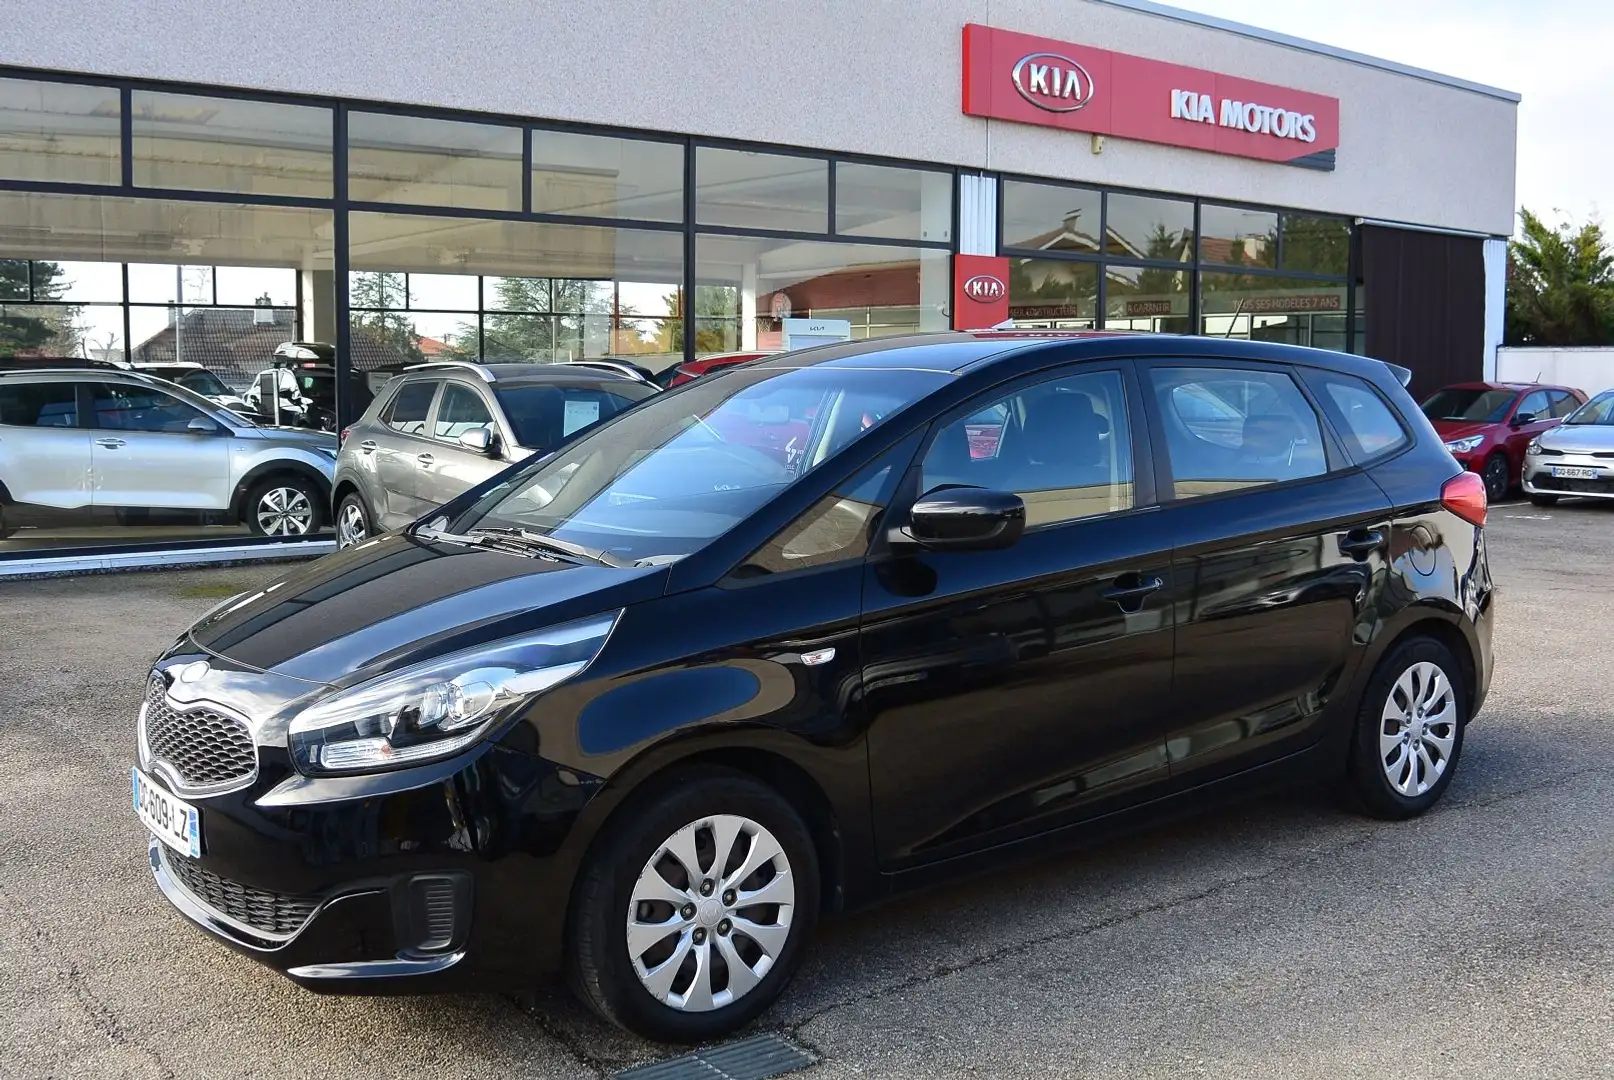 Kia Carens 1.6 GDI 135CH STYLE ISG 5 PLACES - 1